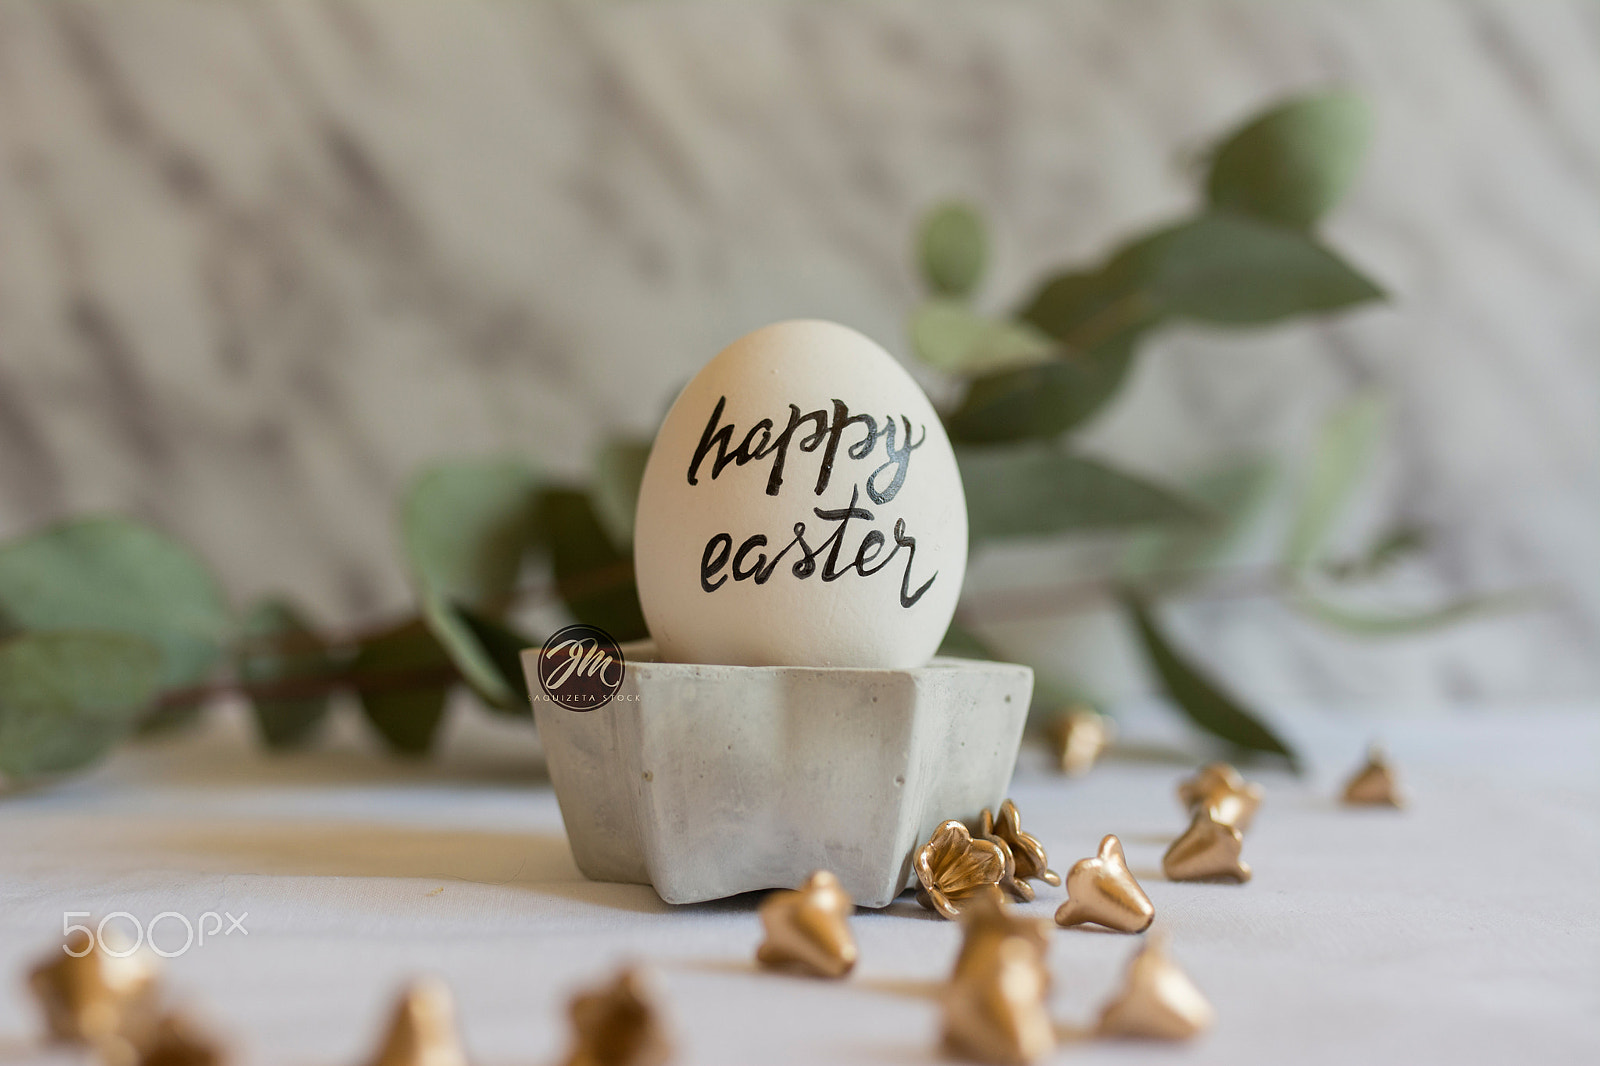 Nikon D7100 sample photo. Easter, egg setting happy easter message photography